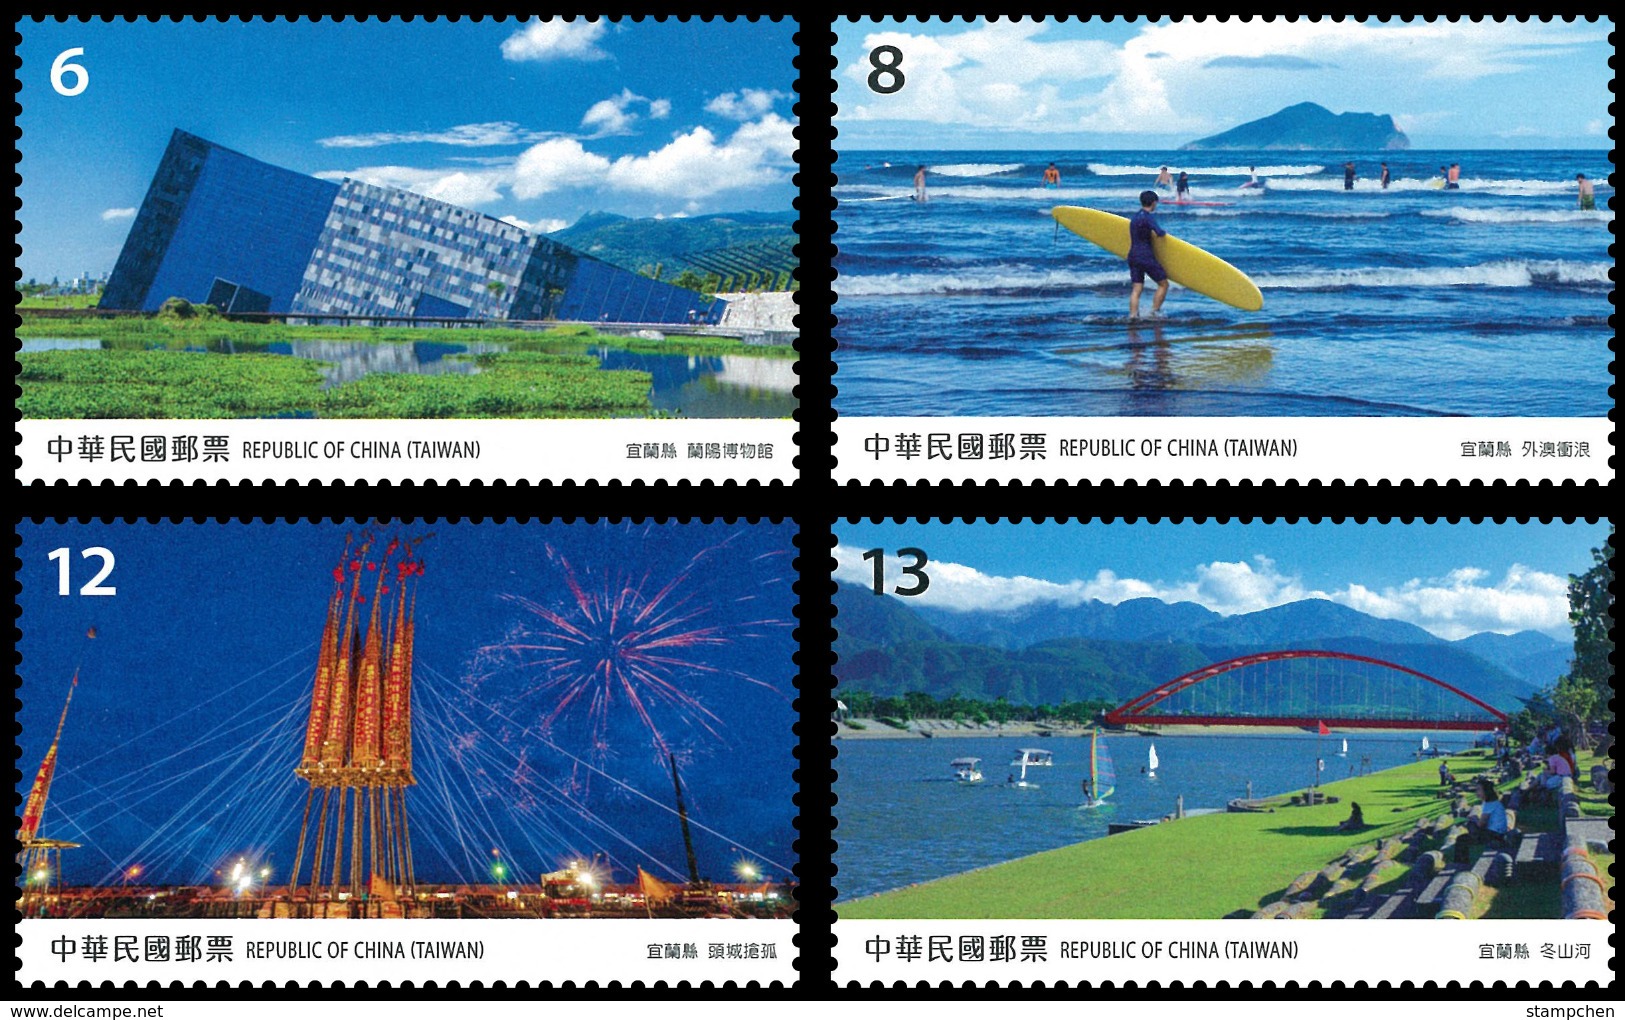 2019 Taiwan Scenery -Yilan Stamps Museum Island Surfing Religious Festival Bridge Boat Park - Sailing